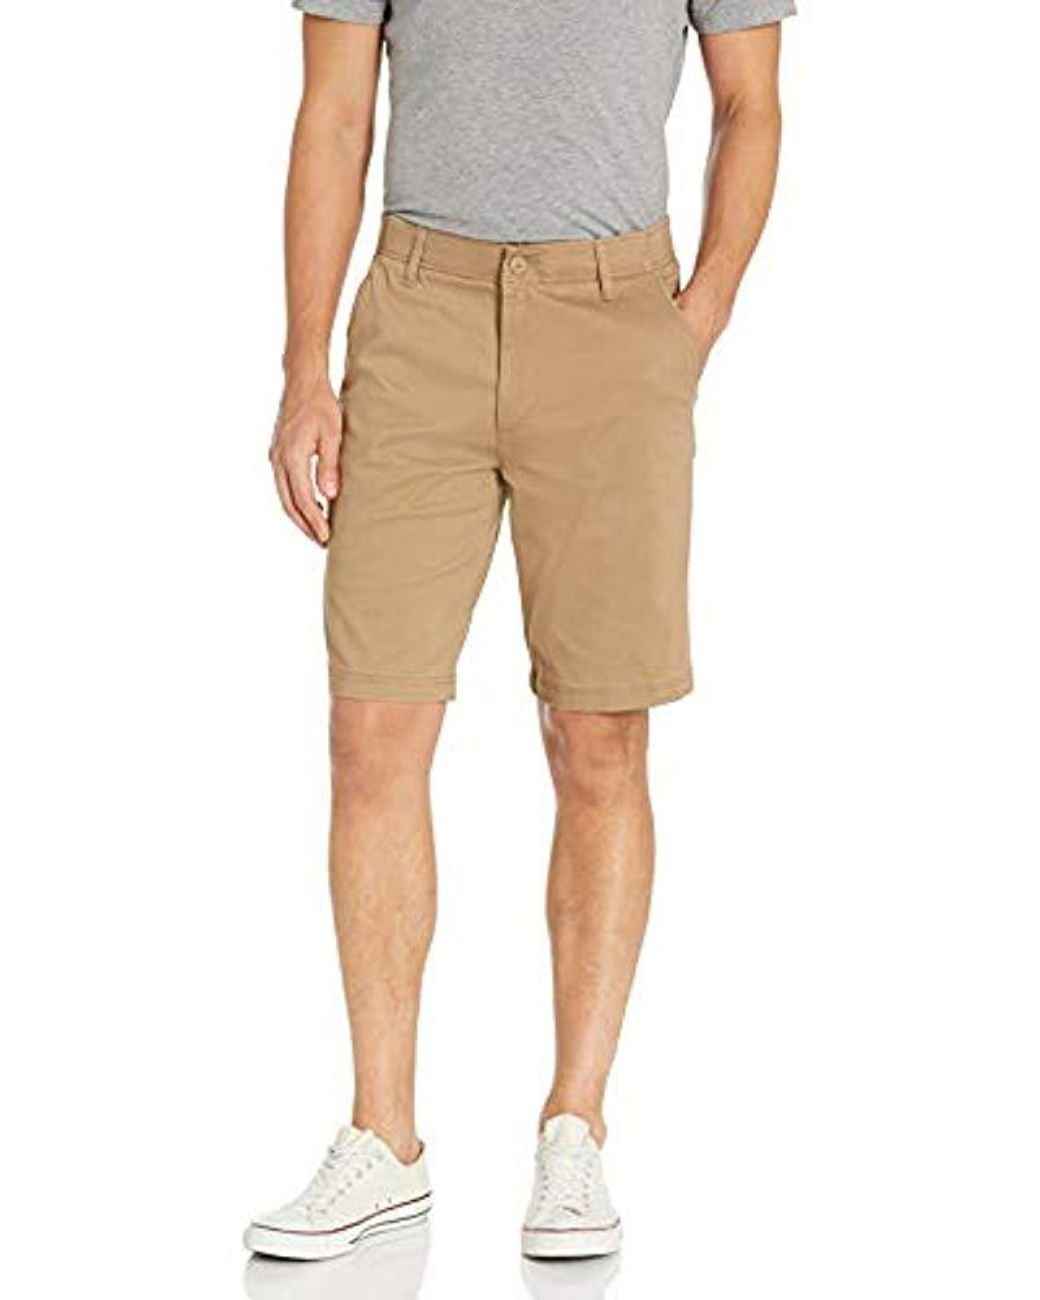 Lee Jeans Denim Performance Series Extreme Comfort Short in Natural for ...